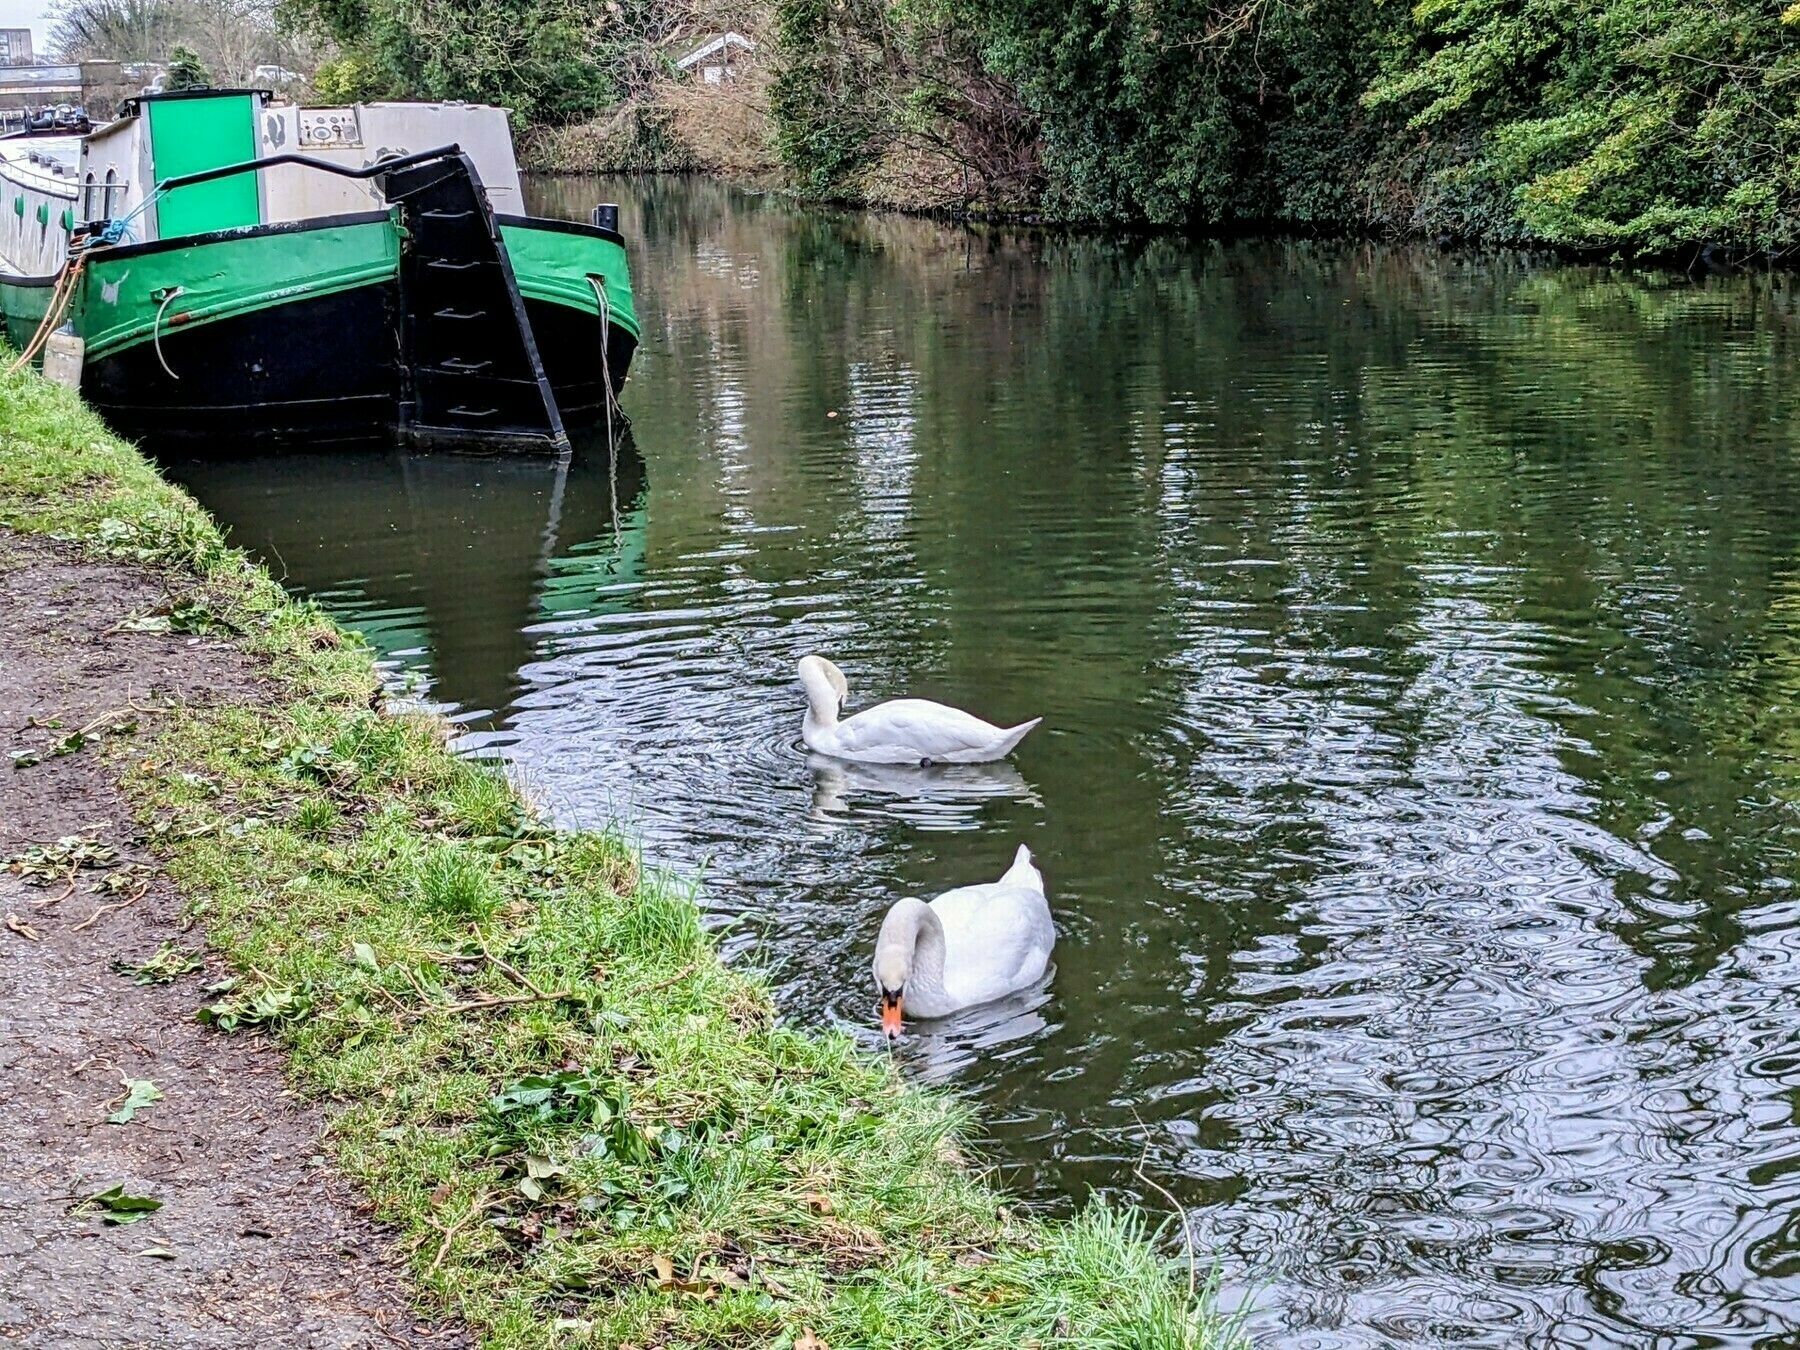 Photo from the canal towpath looking towards a green narrowboat moored on the towpath side, with two white swans swimming in the black water 